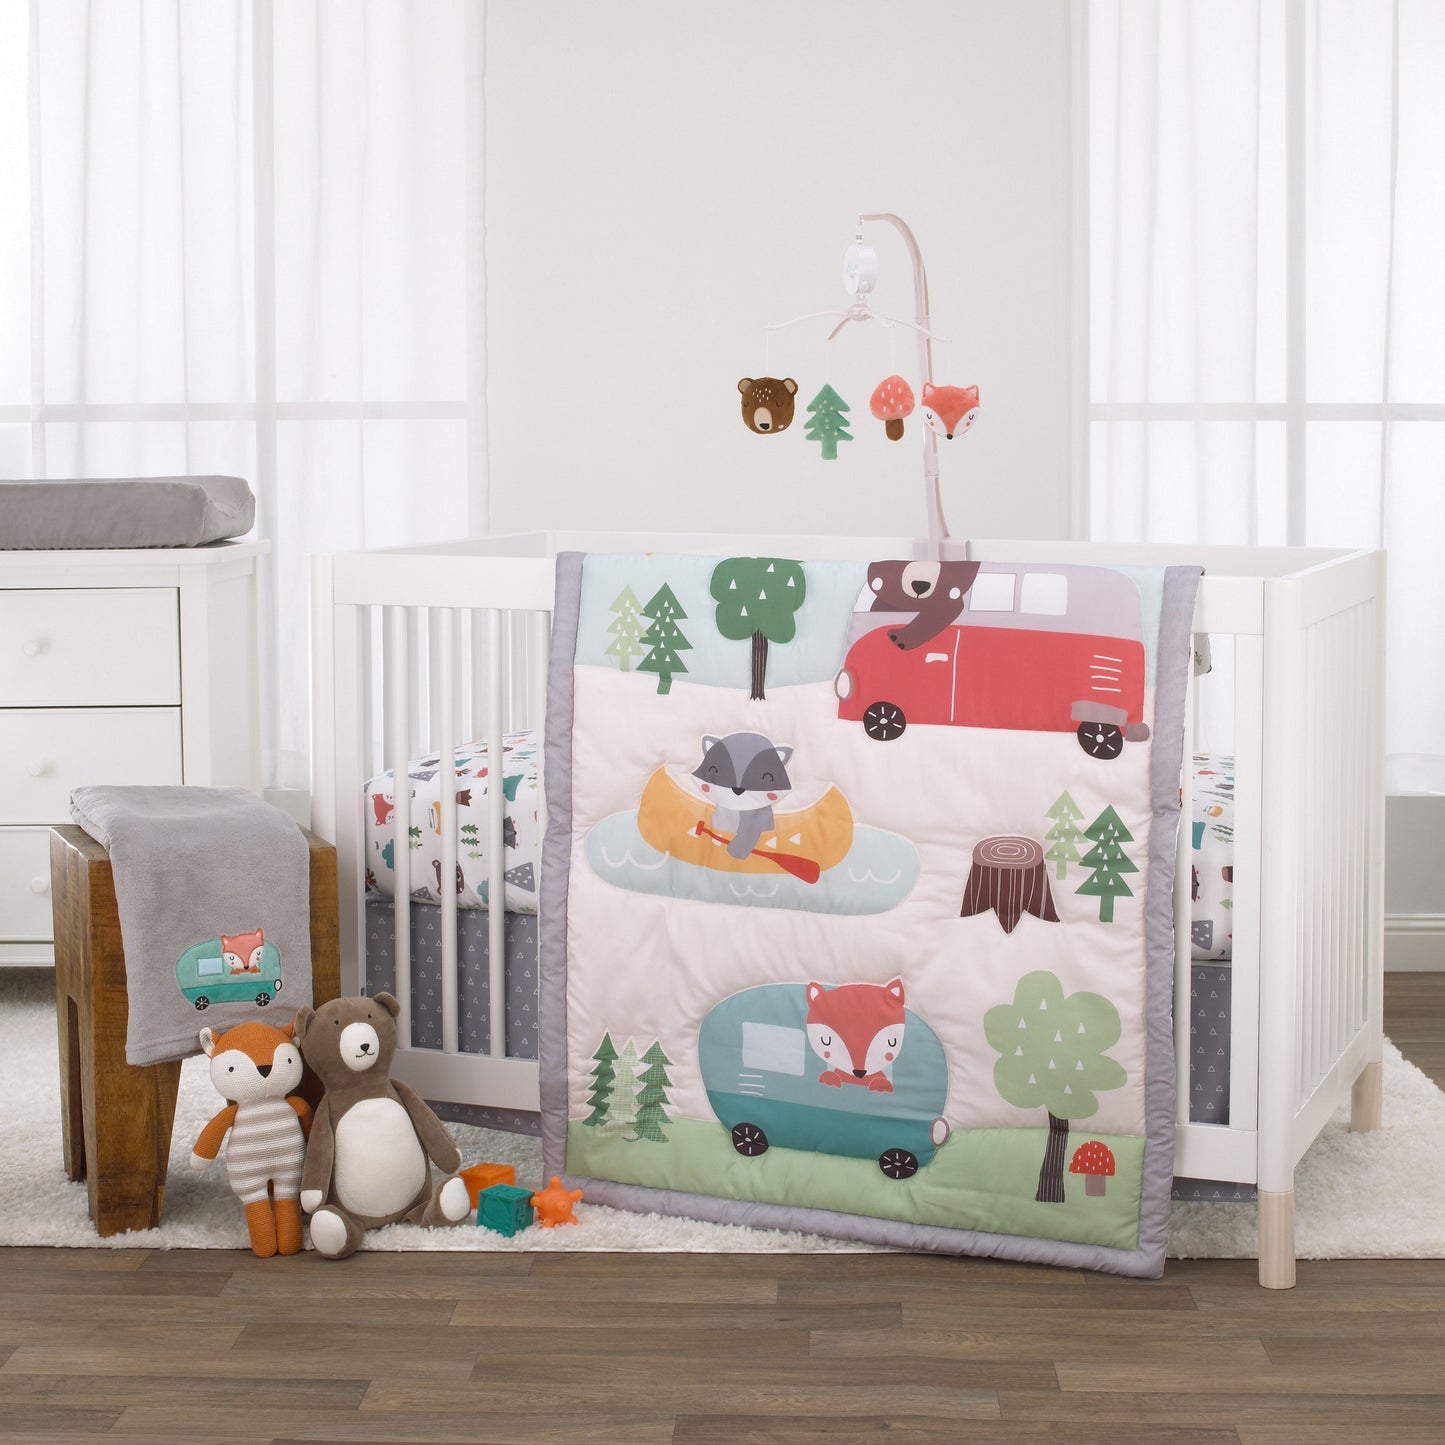 Little Love by NoJo Retro Happy Camper Orange, Brown and Green Forest Nursery Crib Musical Mobile with Bear, Fox, Mushroom and Pine tree